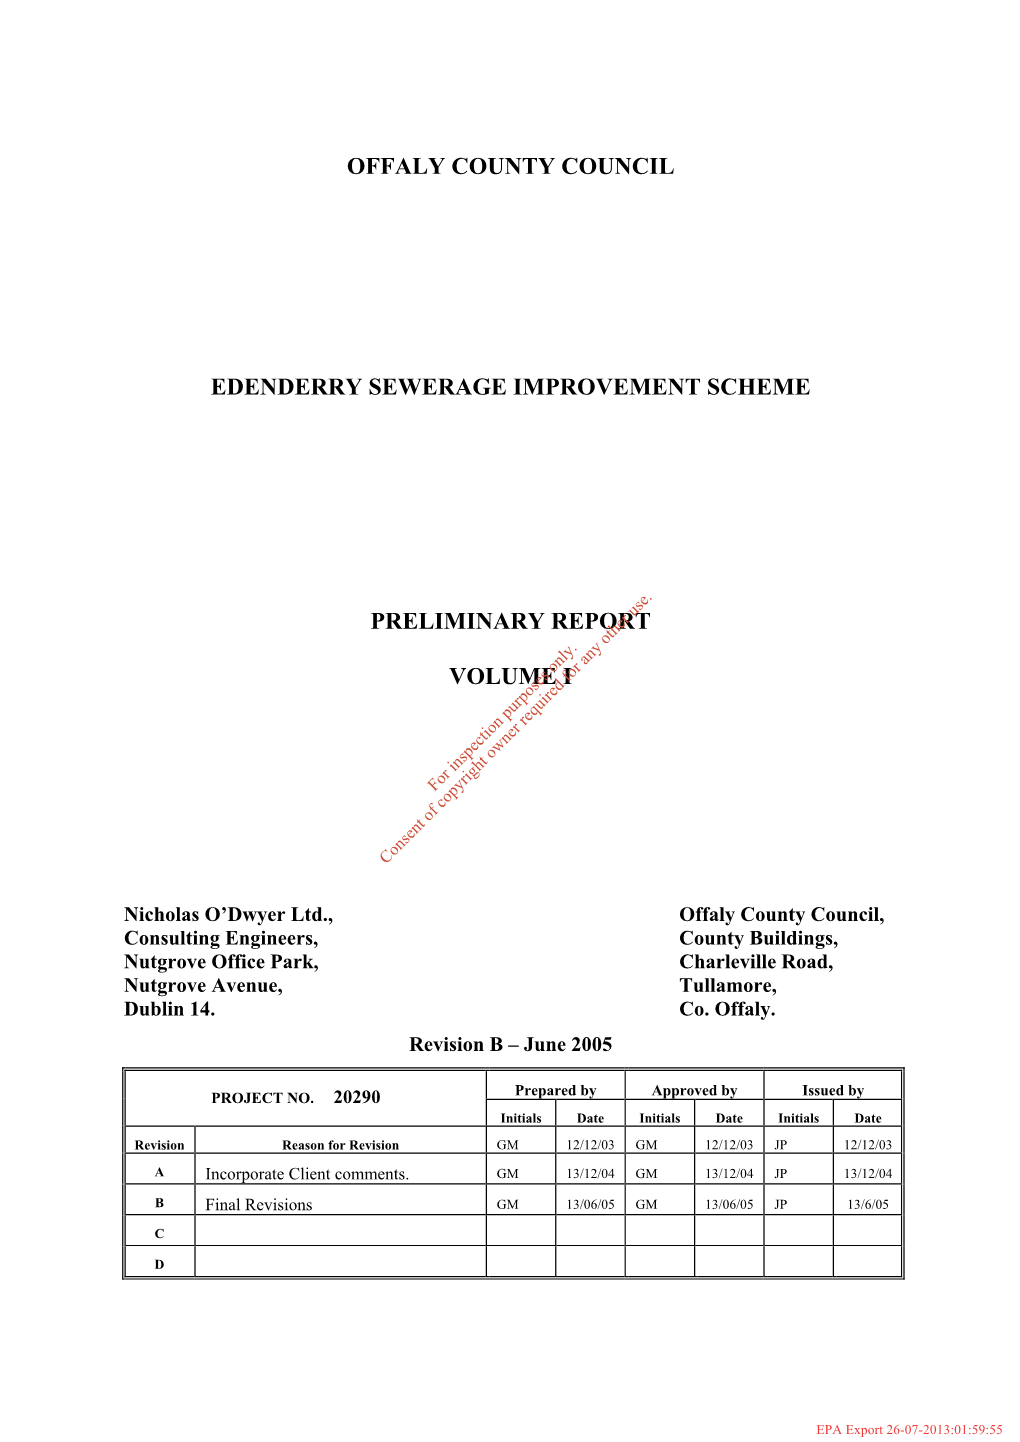 Offaly County Council Edenderry Sewerage Improvement Scheme Preliminary Report Volume I